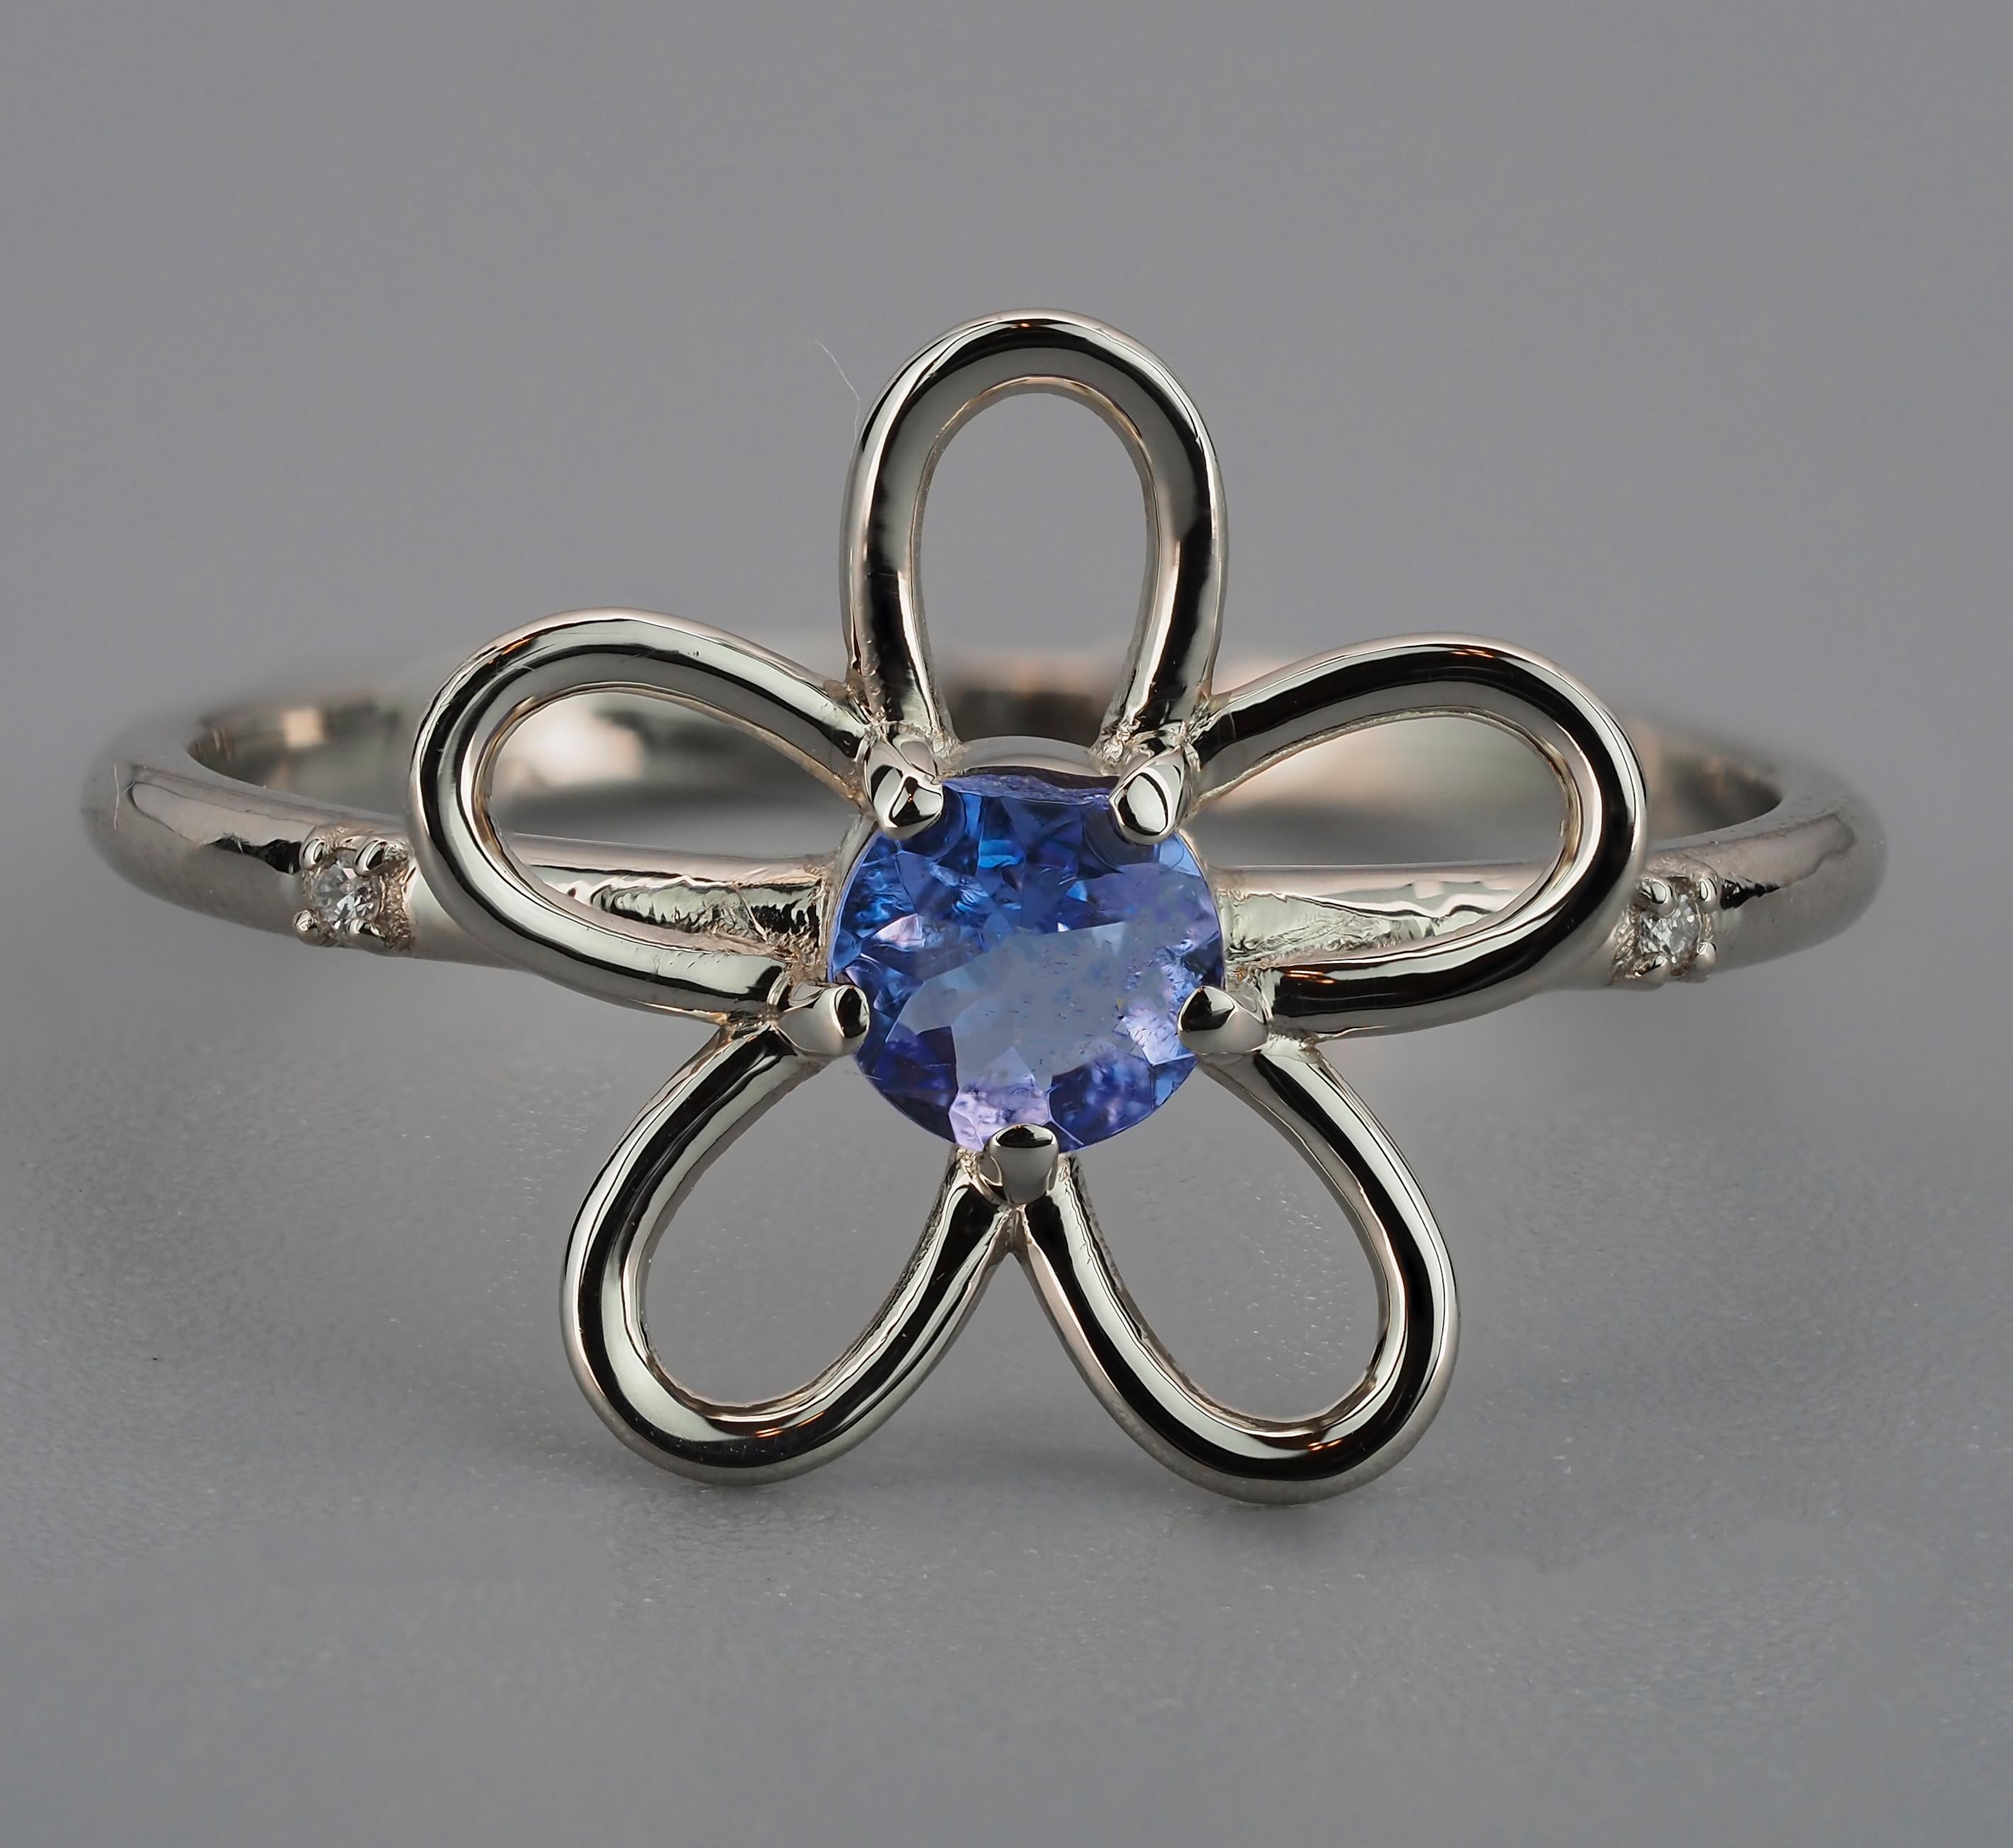 For Sale:  14k Gold Flower Ring with Tanzanite and Diamonds 3